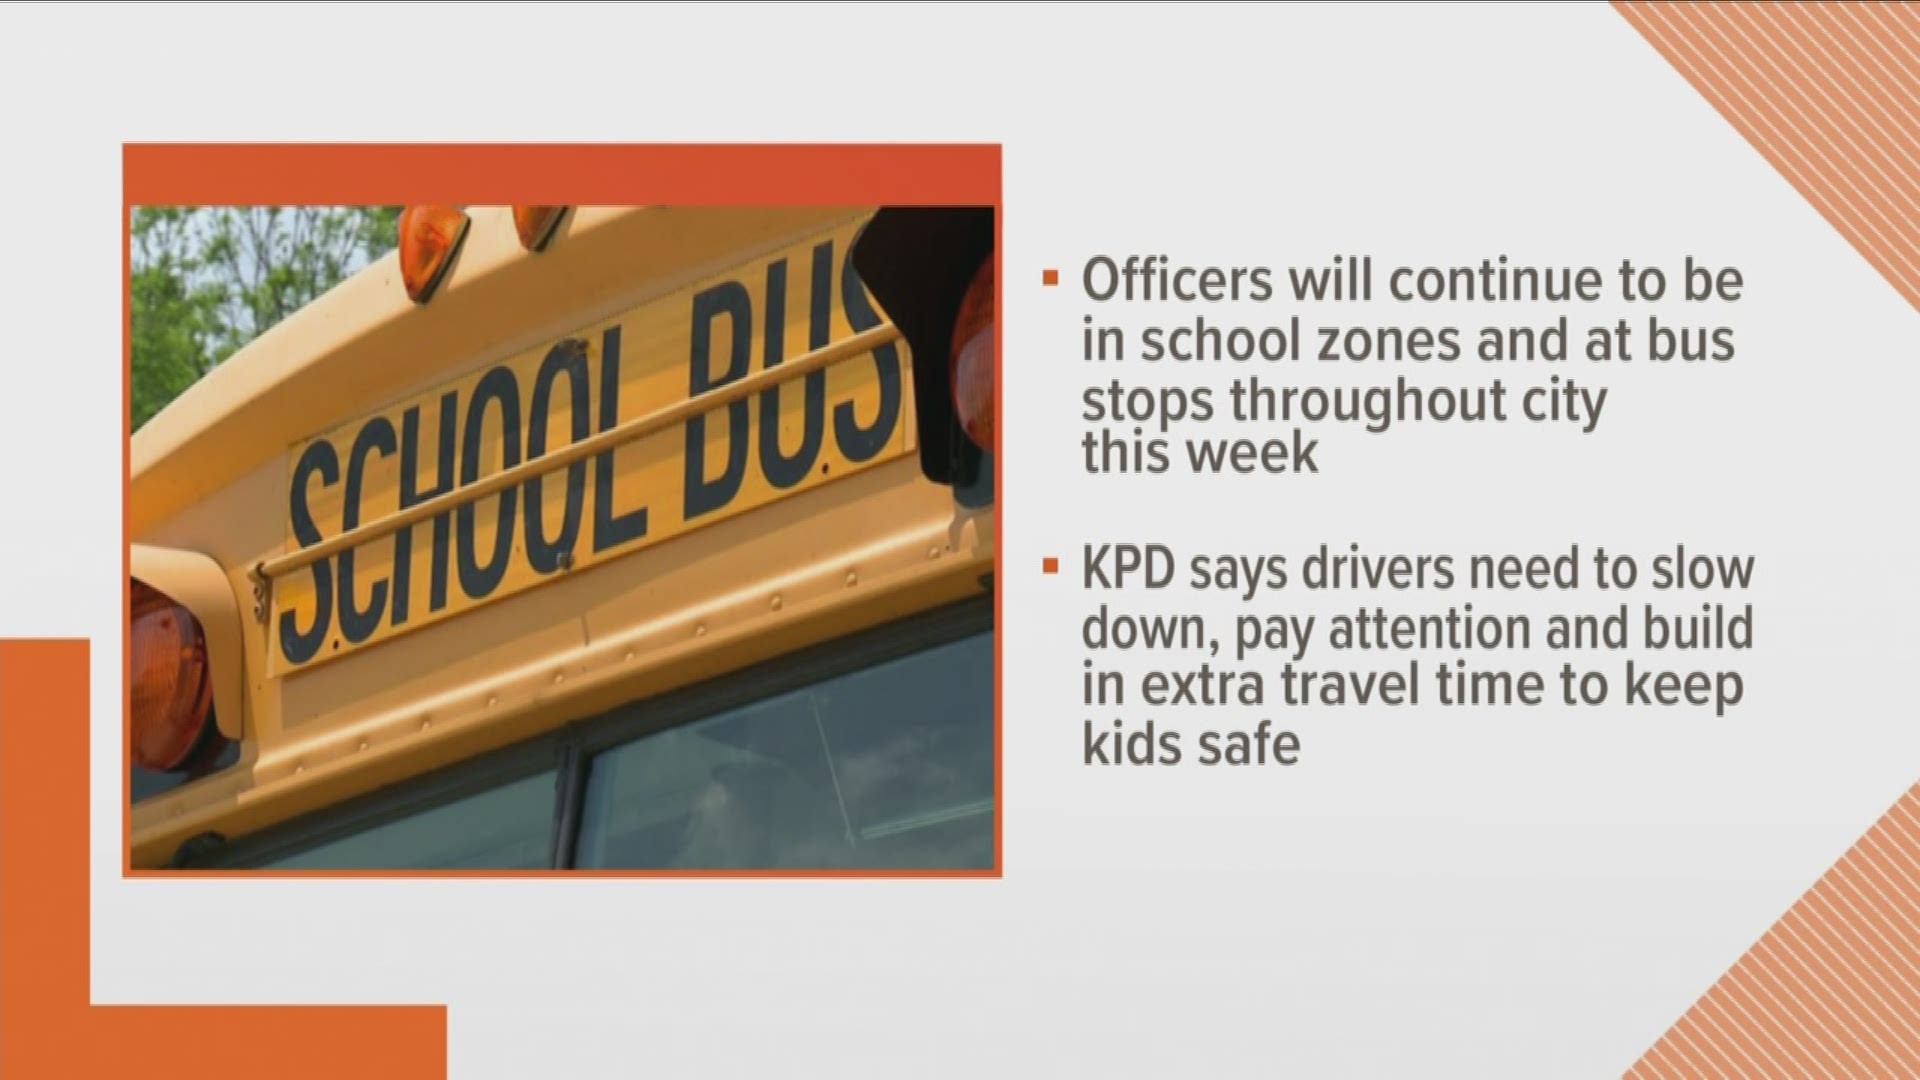 Knoxville police officers issued 469 citations in school zones during the first week of school.